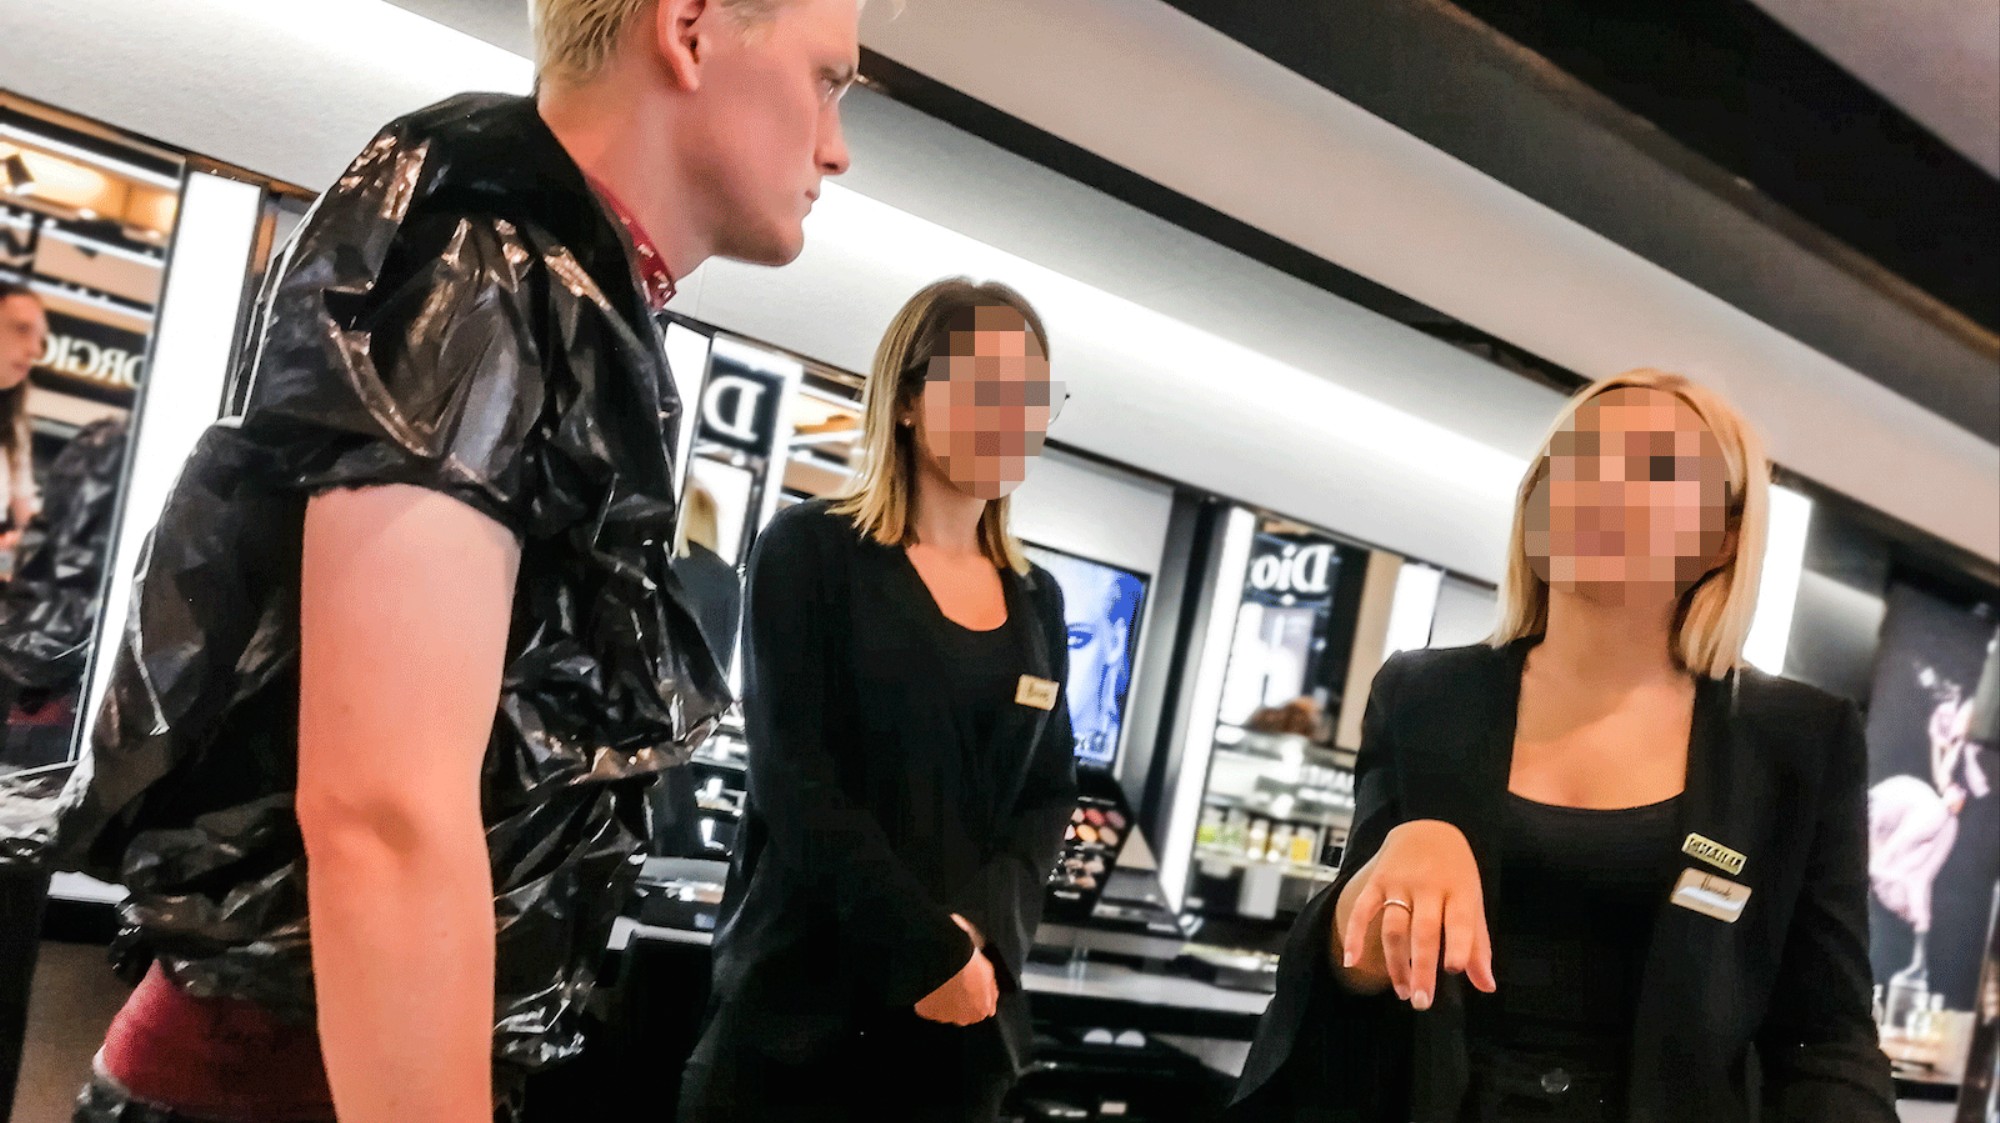 I Tested The Harrods Dress Code By Dressing Like A Complete